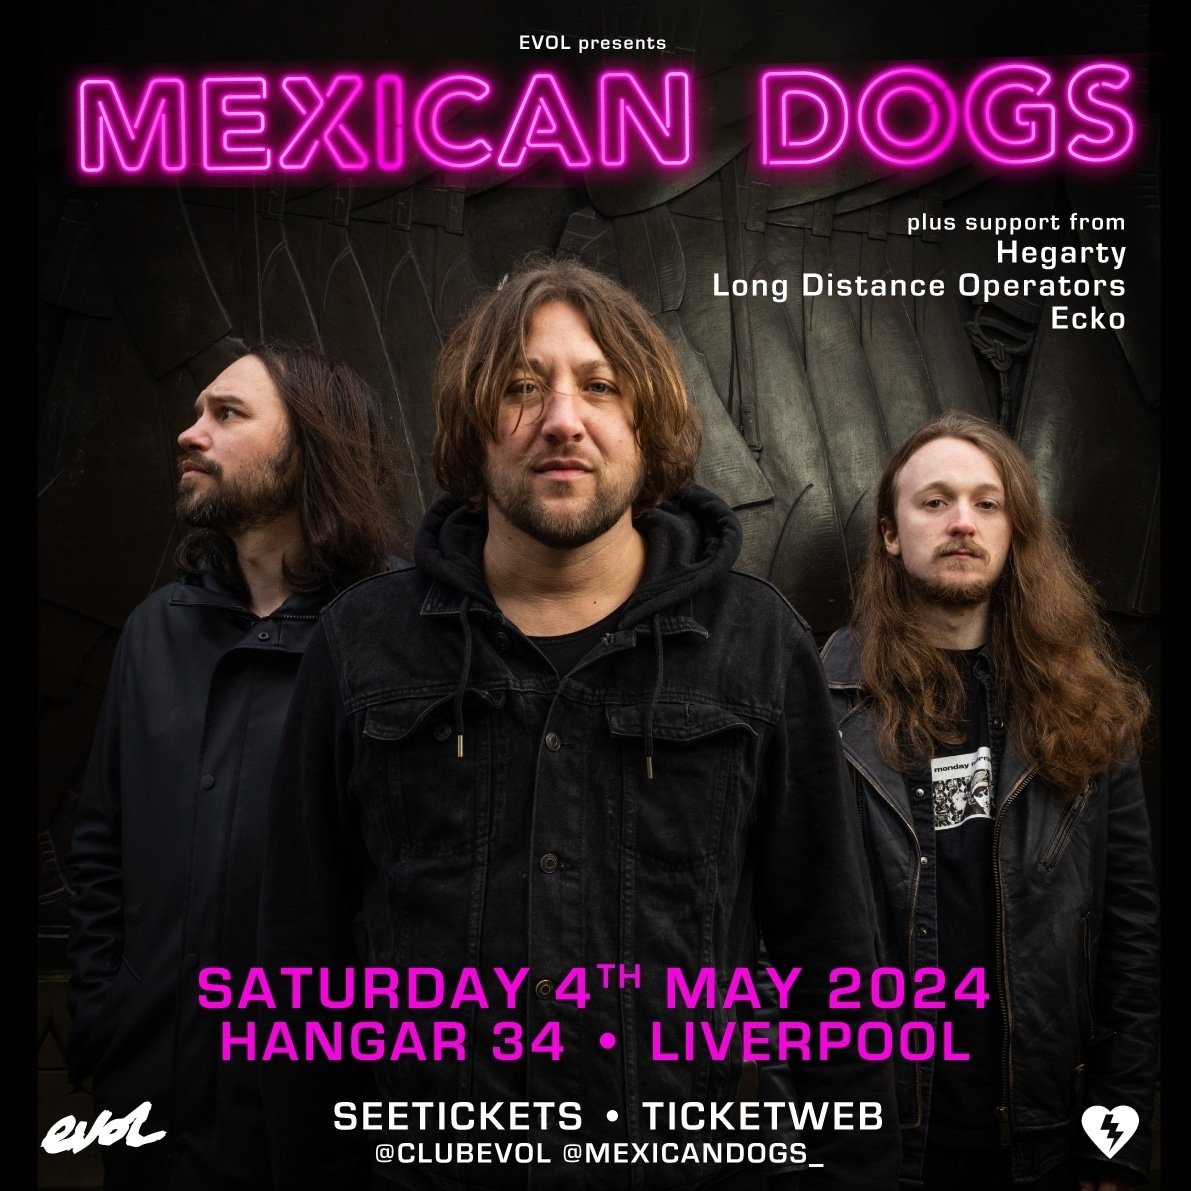 ONE WEEK TODAY PEOPLE 🙌 We cant wait to blow the roof off @Hangar34Liver Let's make it massive people! some physical tickets at EST 22 Barbers and @deadAirrecords Oronline seetickets.com/event/mexian-d… Thanks for the continuous support The dogs x #livemusic #altmusic